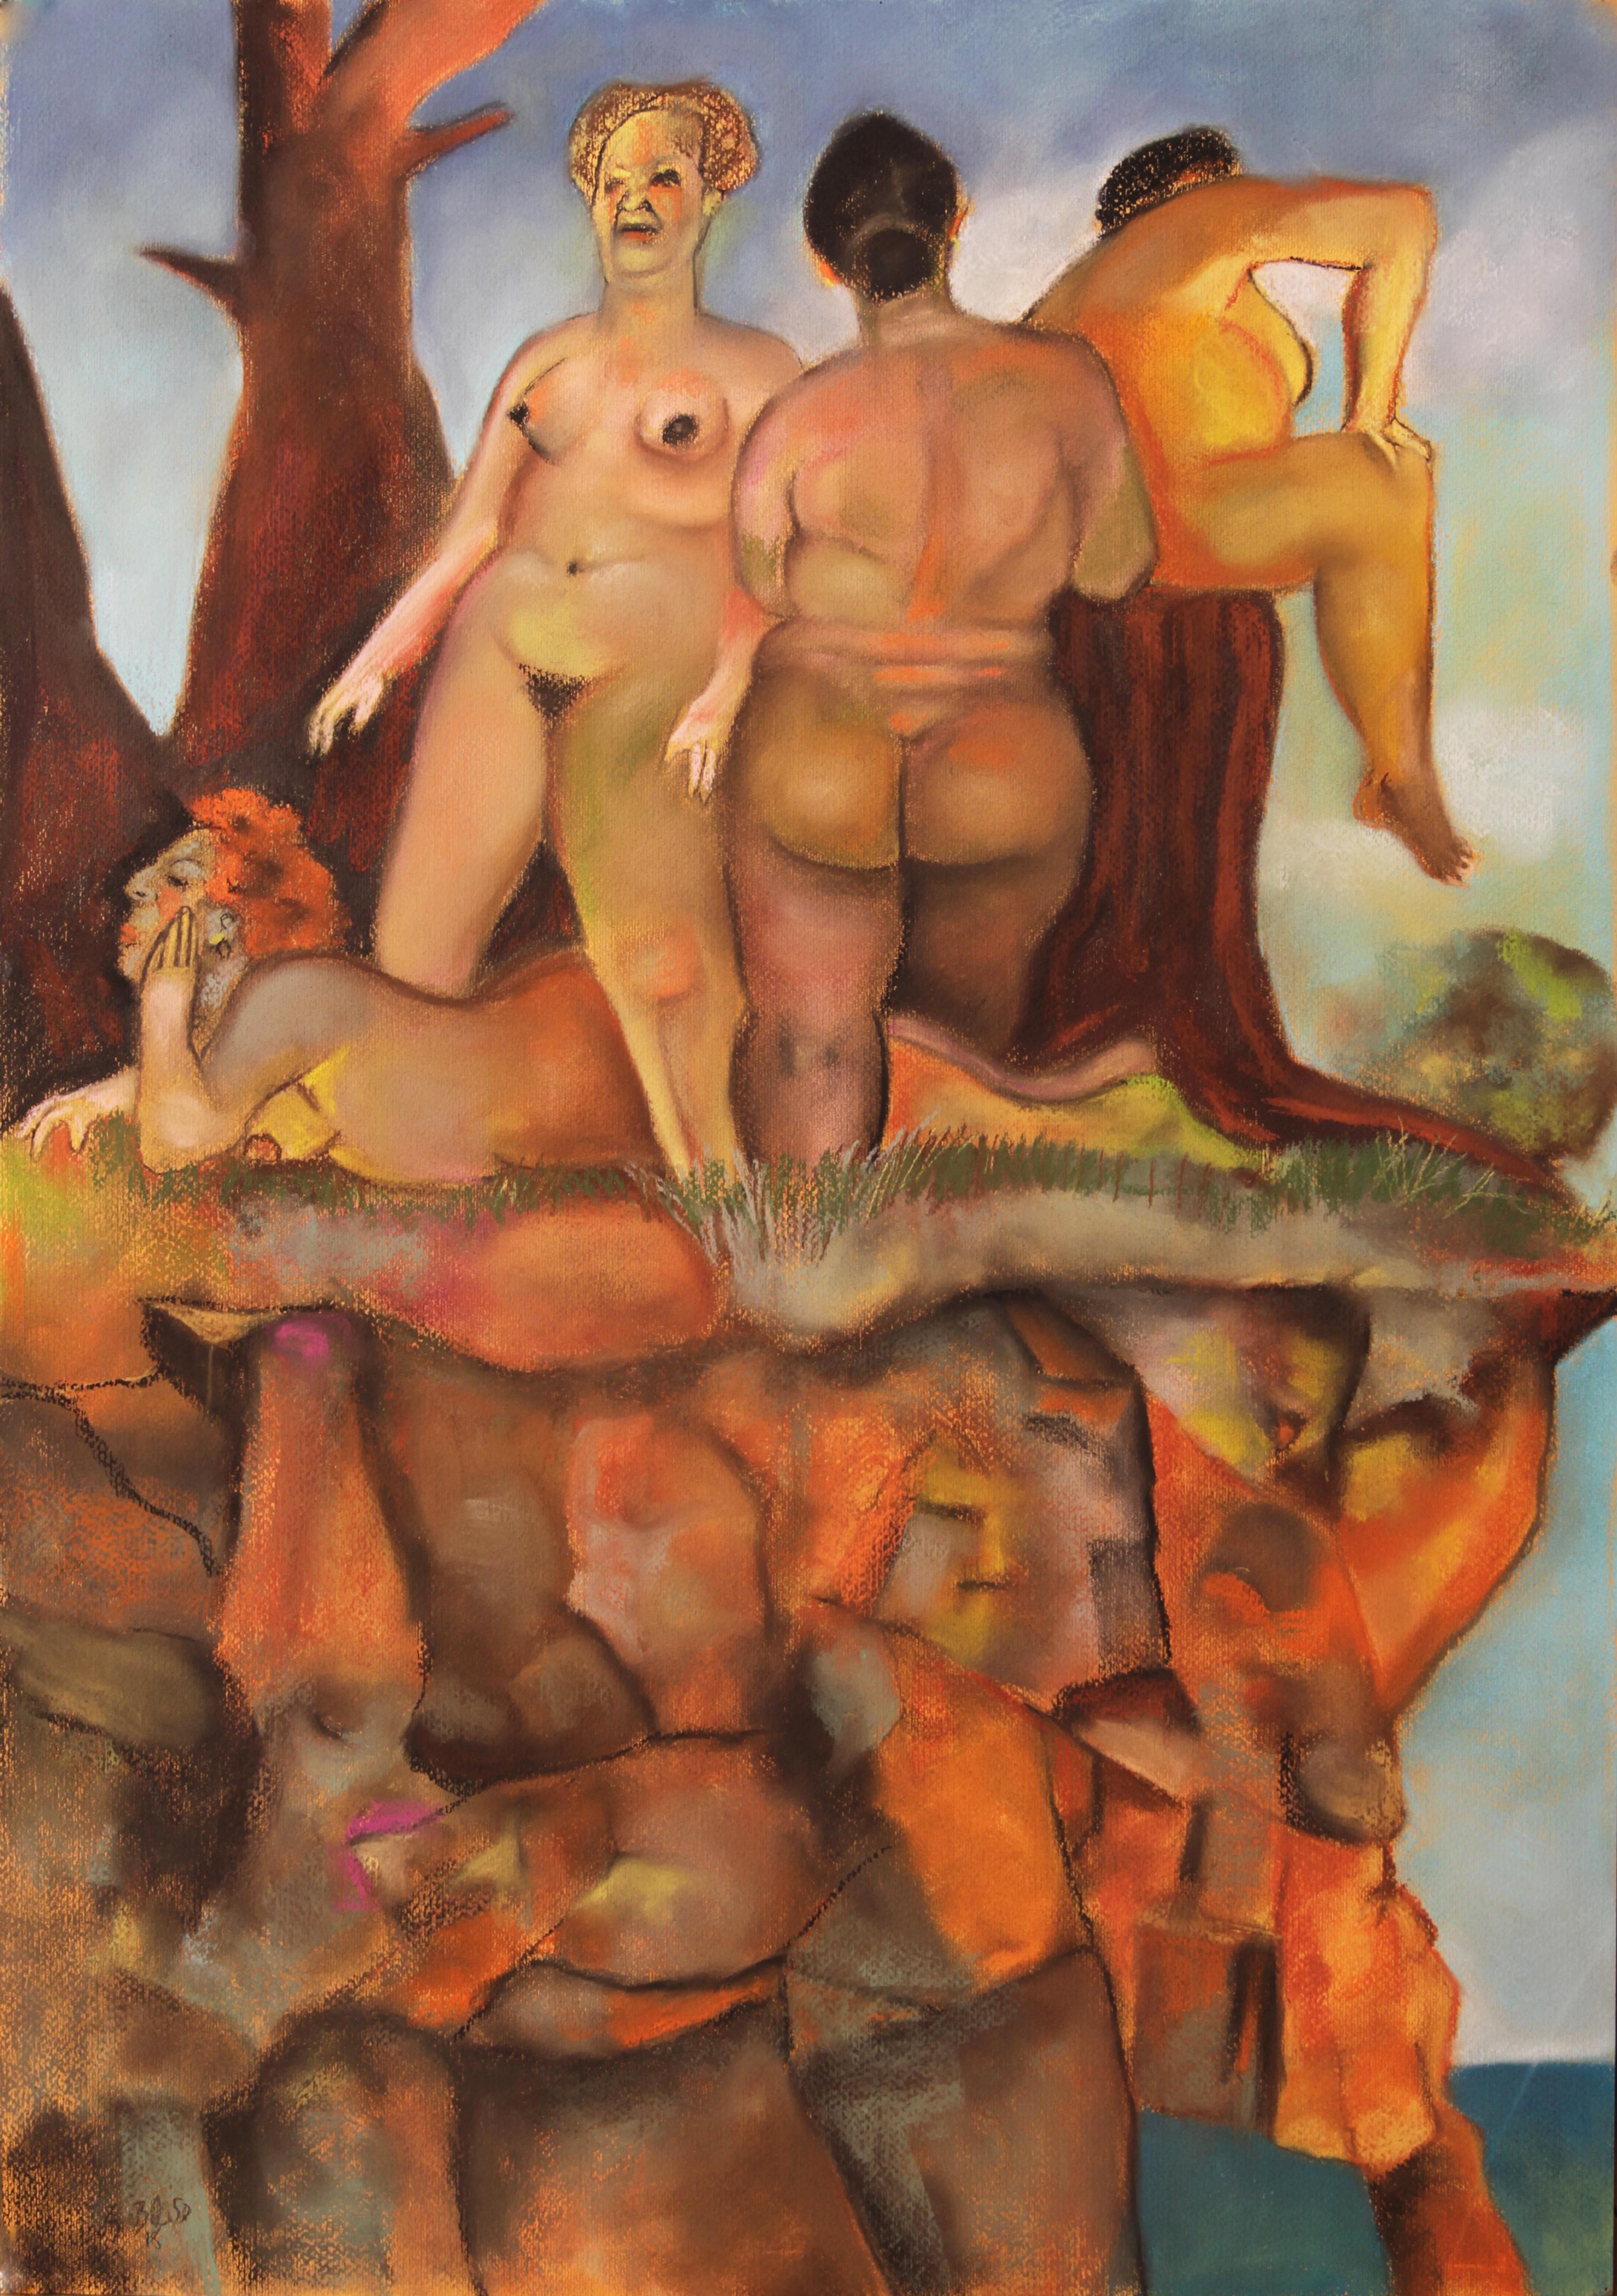 Cliffhanger Nudes  female nude grouping nudes in nature warm colors  - Art by Stephen Basso